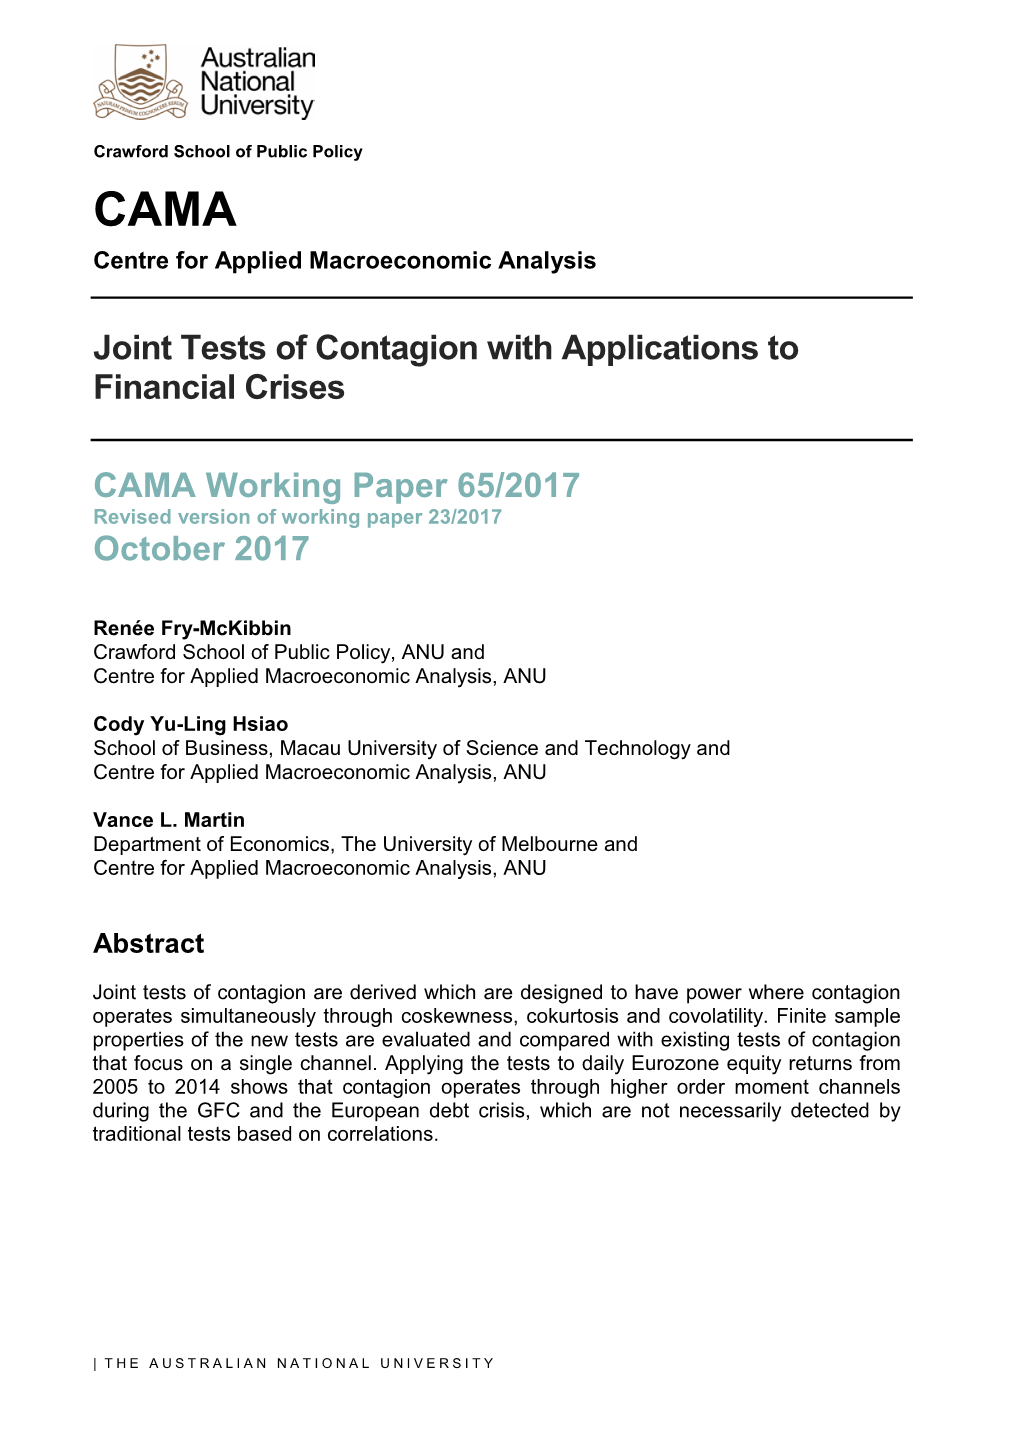 Joint Tests of Contagion with Applications to Financial Crises